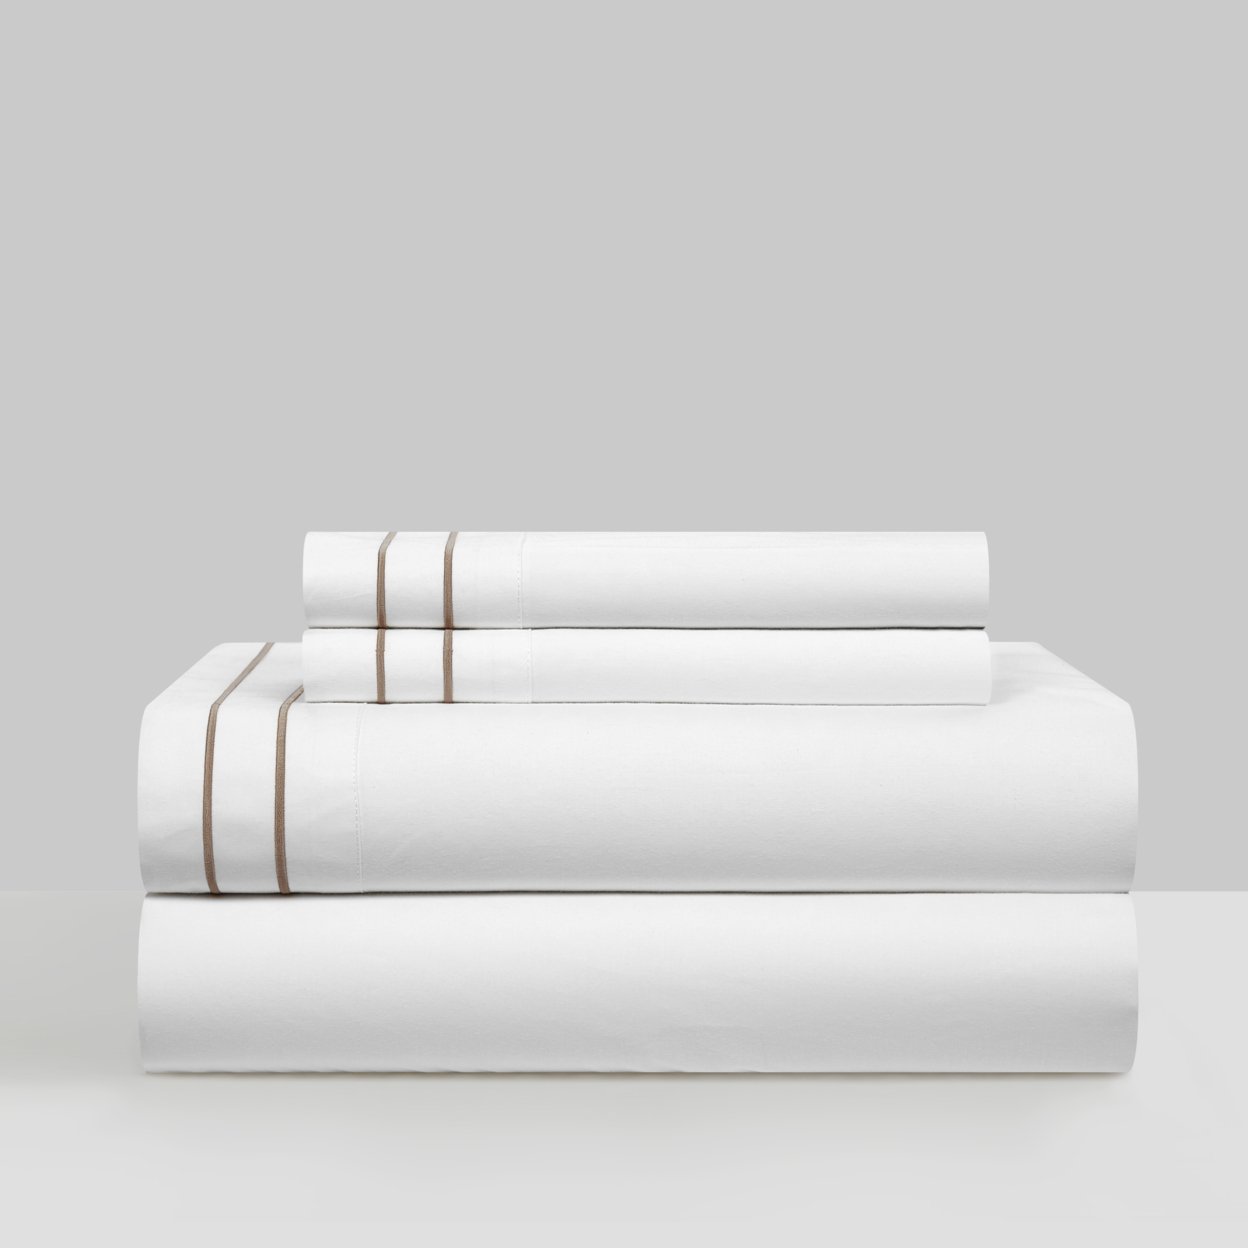 Balensia 4 Piece Organic Cotton Sheet Set Solid White With Dual Stripe Embroidery - Gold, Queen